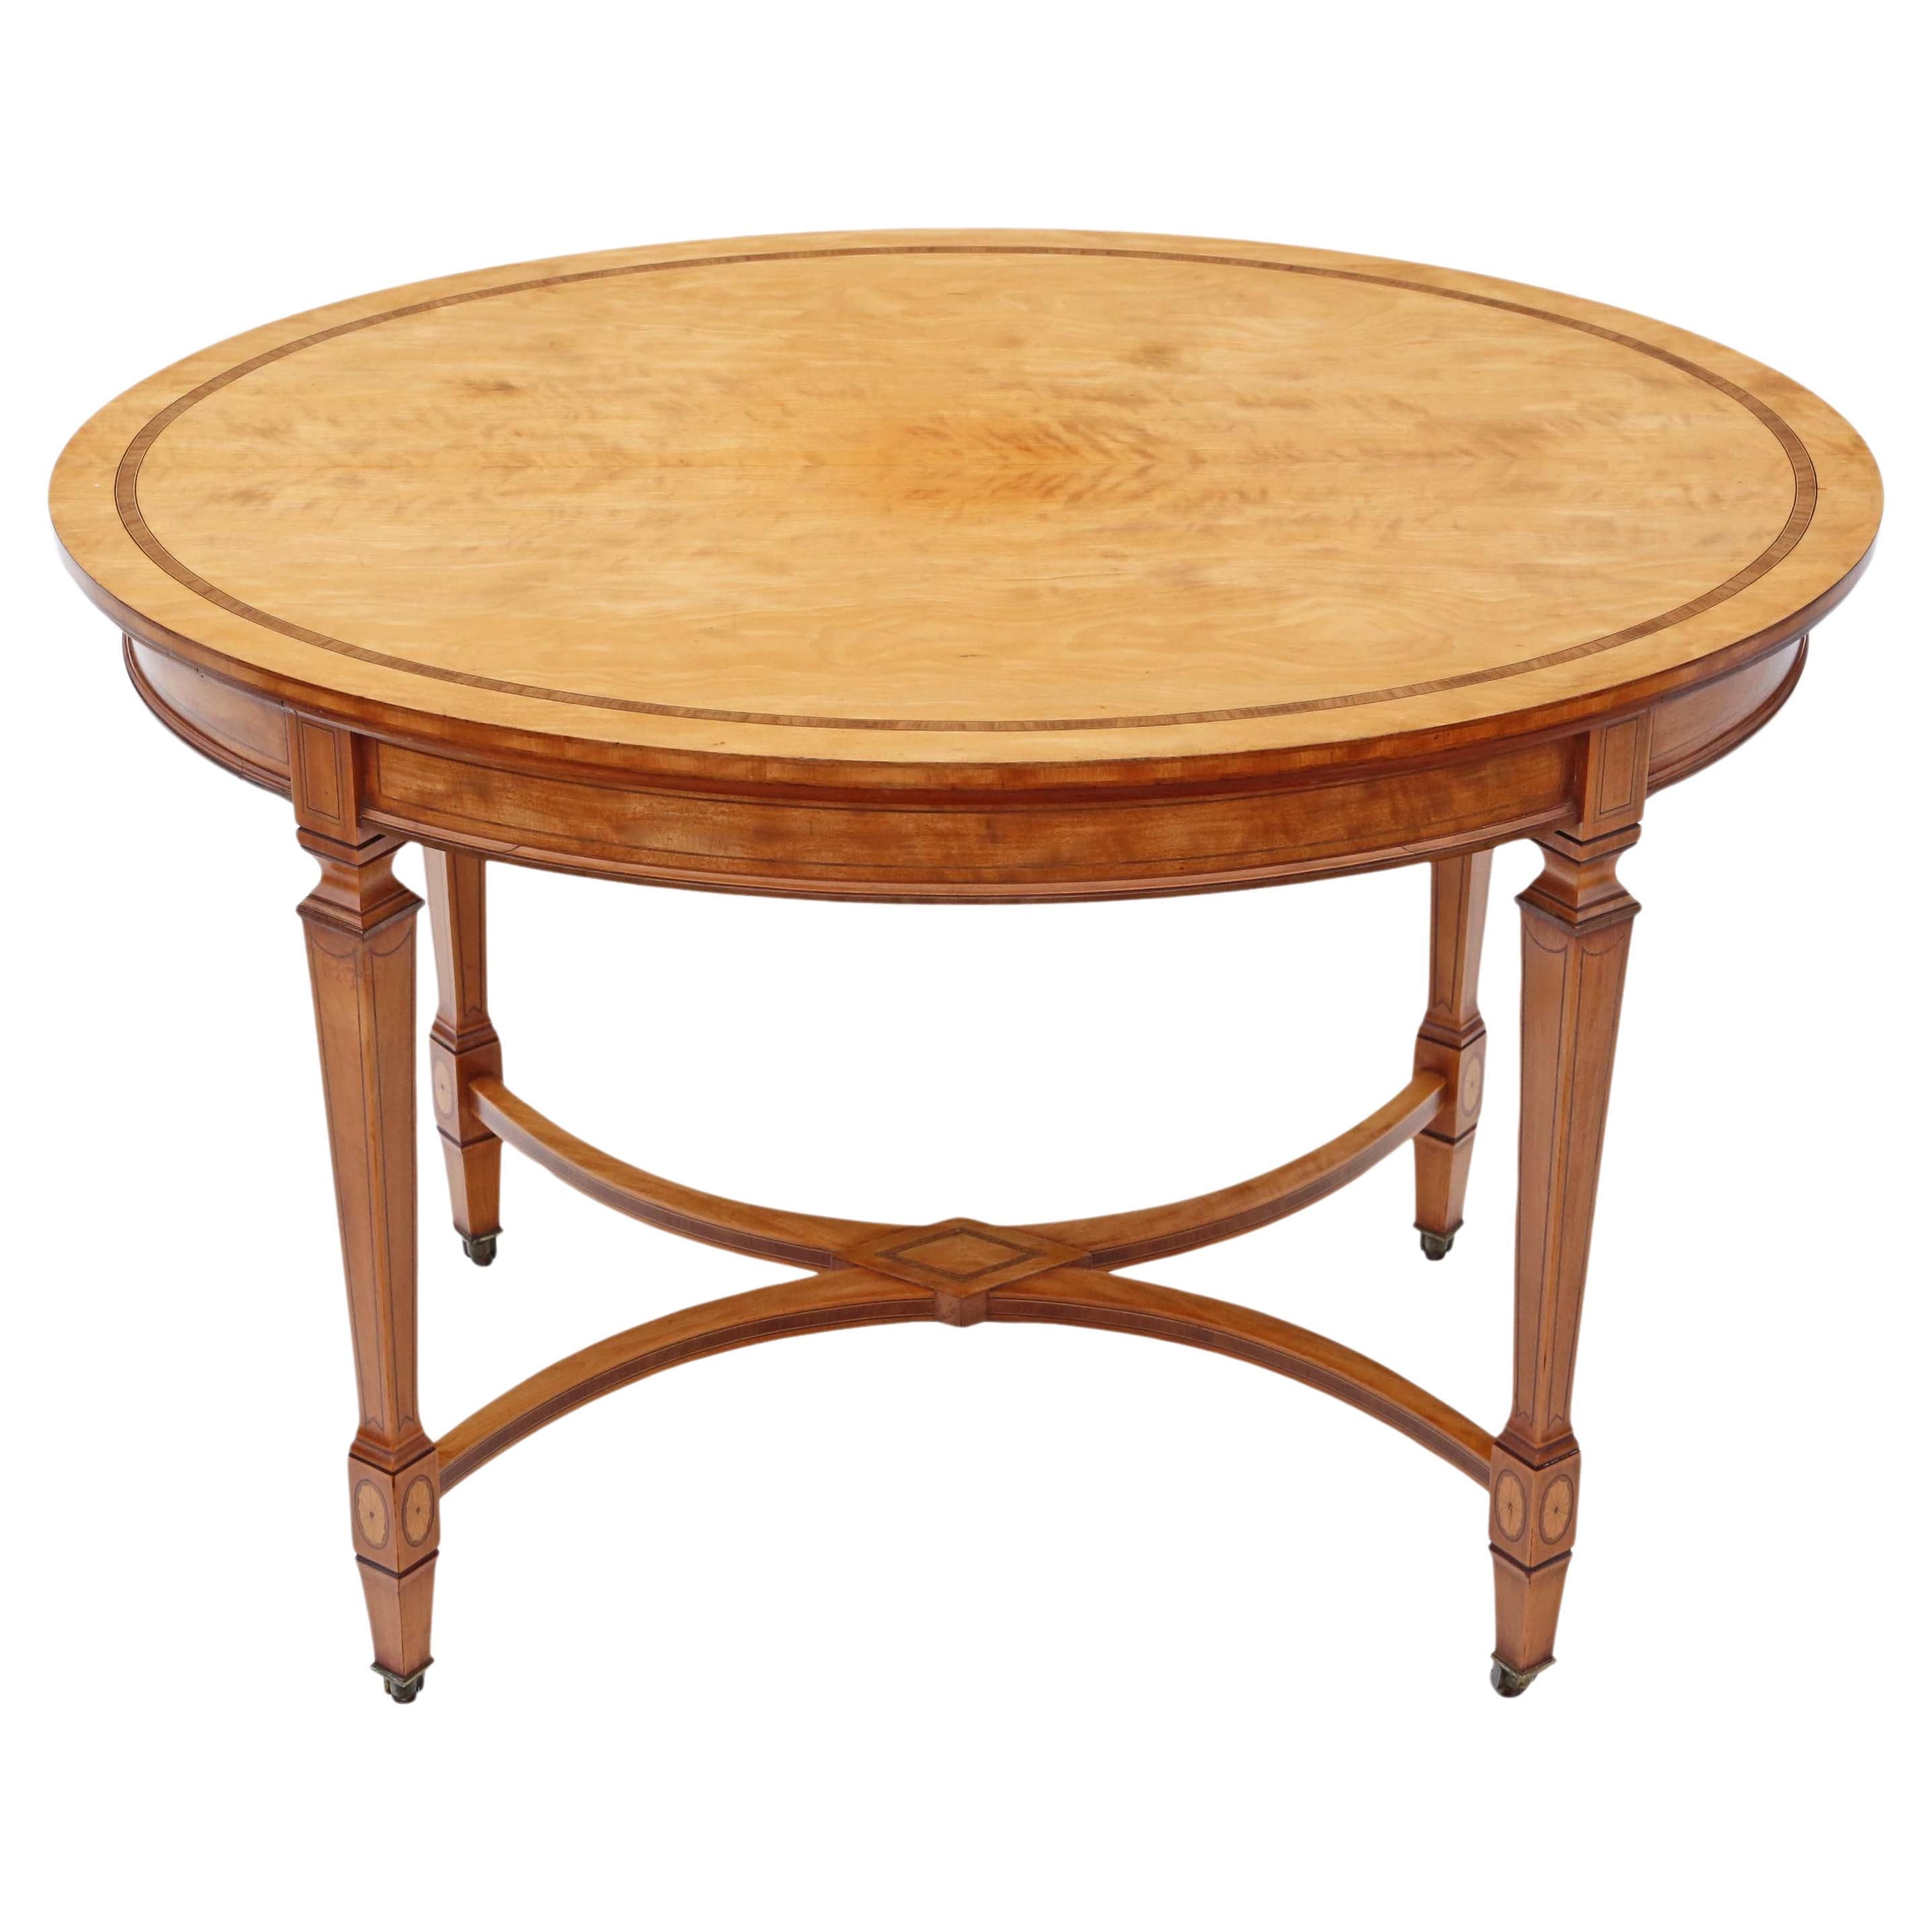 Fine Quality Victorian Inlaid Satinwood Centre Table from circa 1880-1900, Antiq For Sale